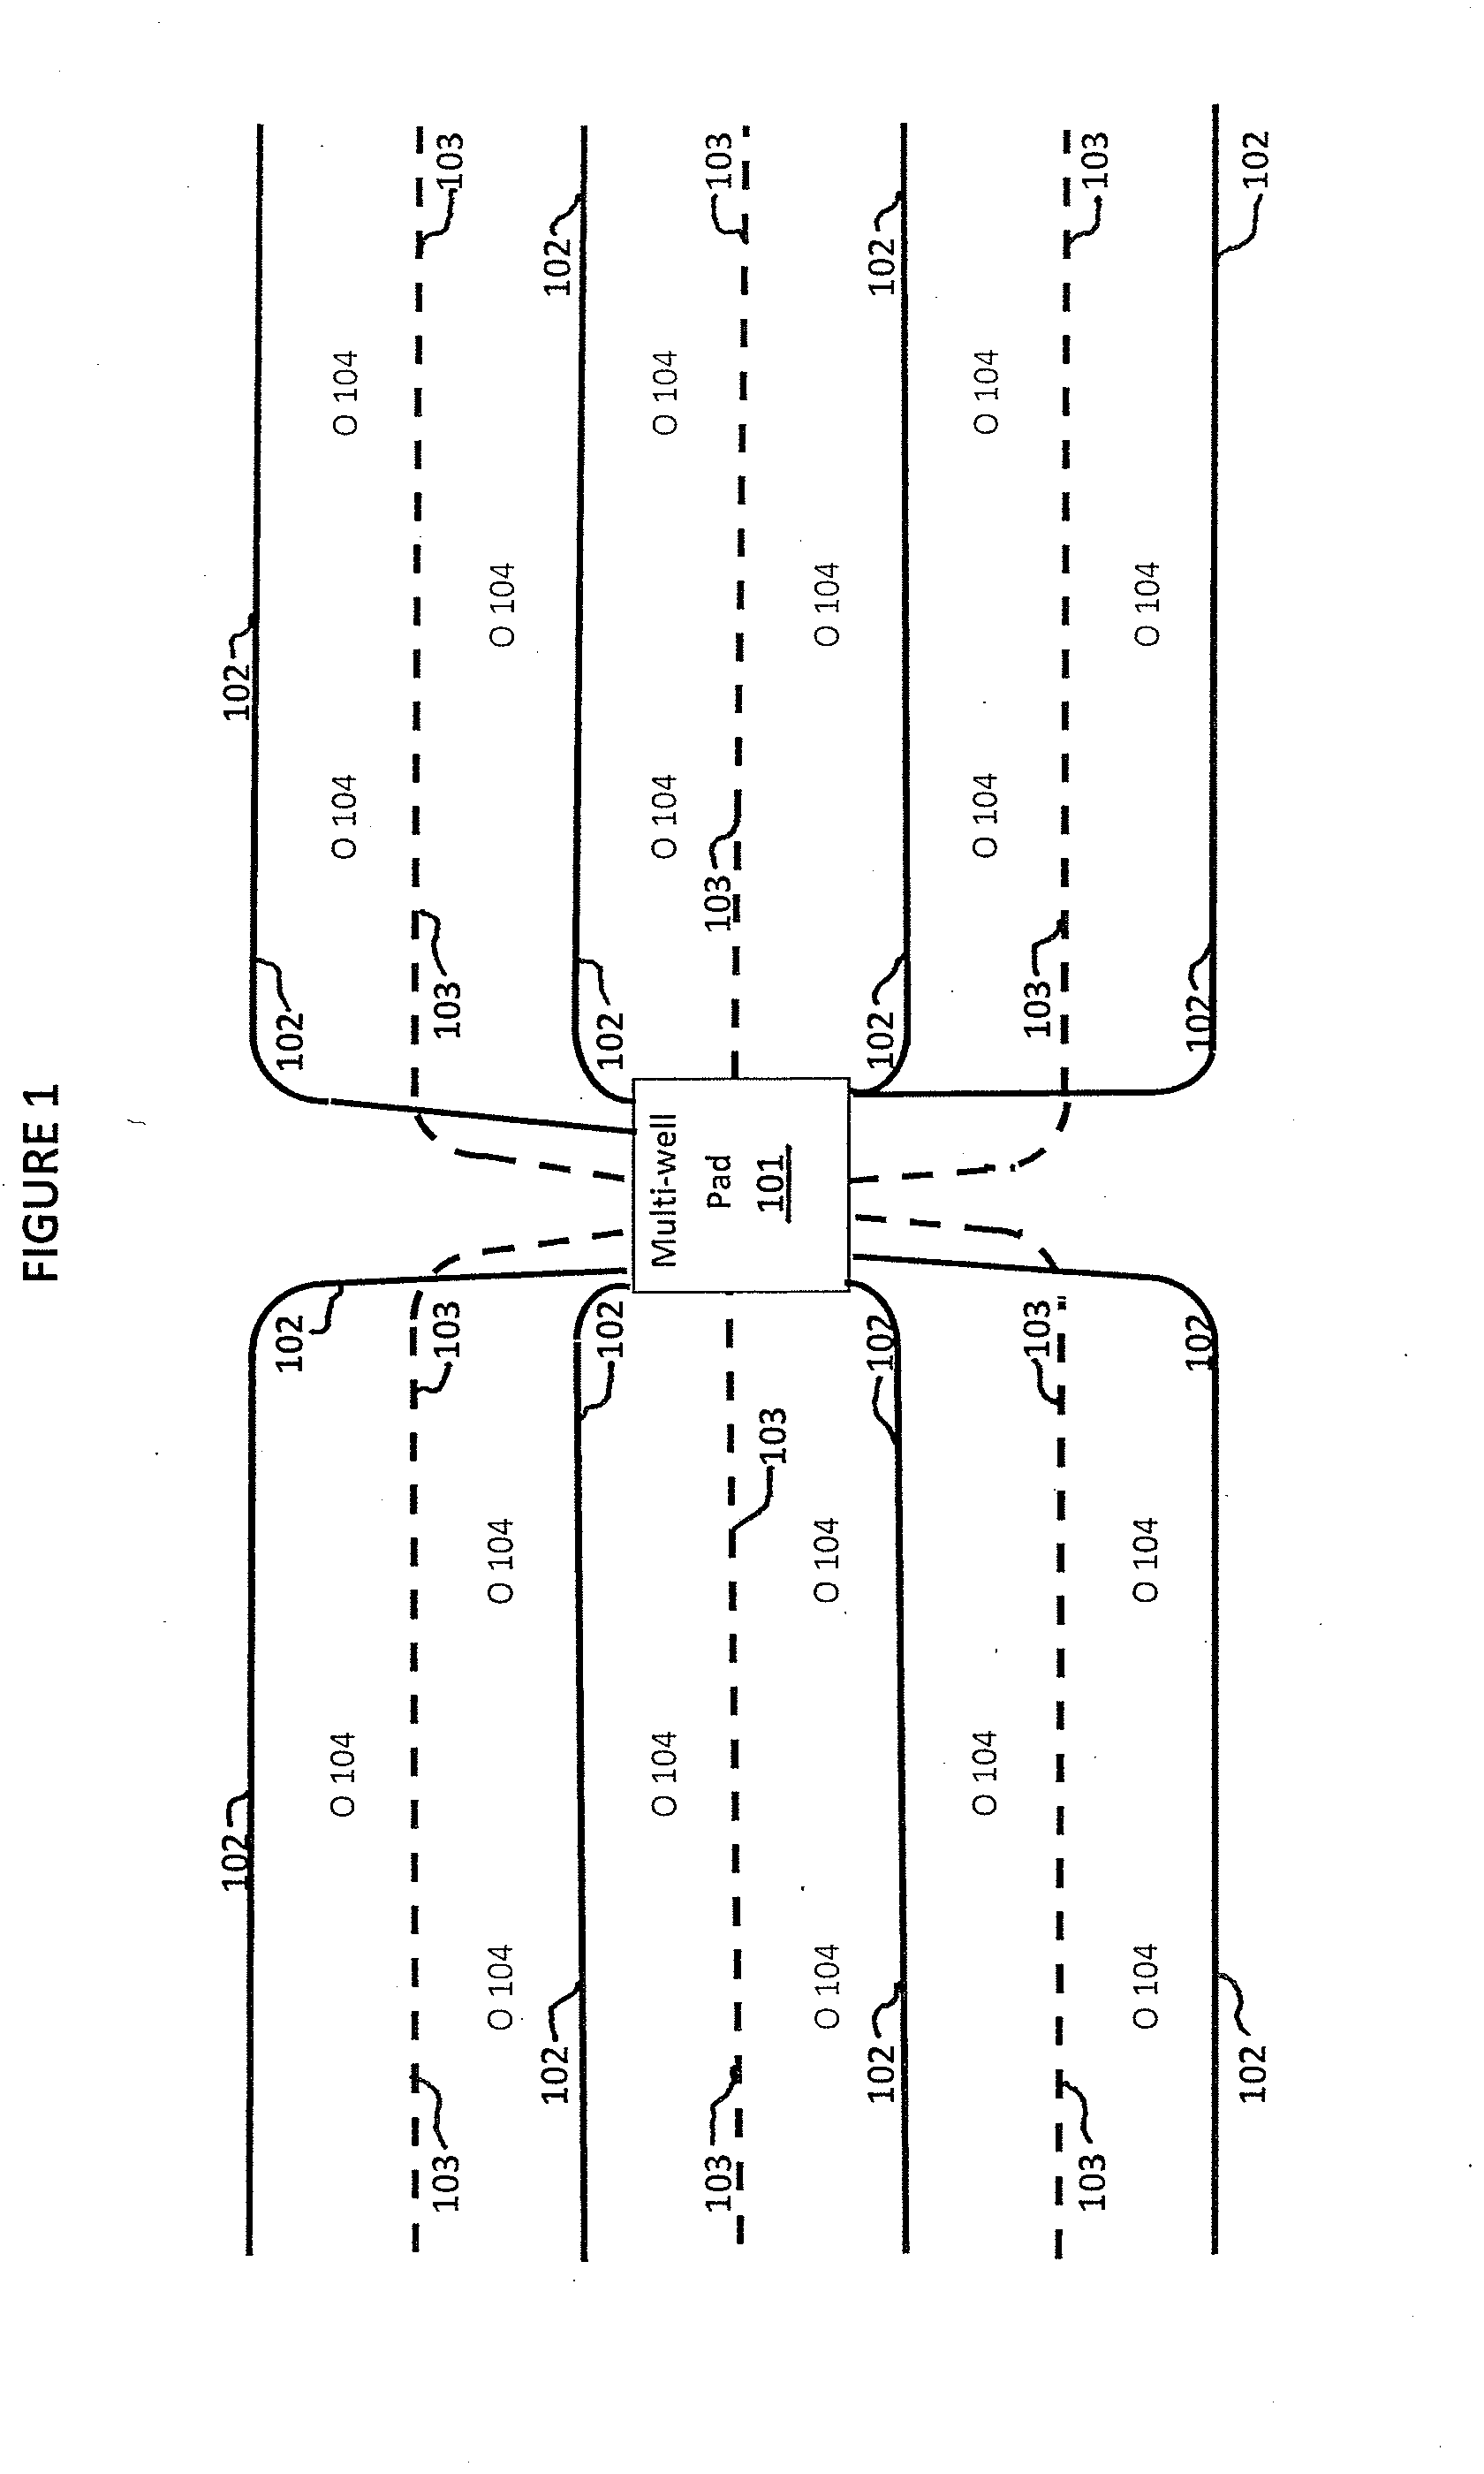 Method of recovering hydrocarbons from carbonate and shale formations